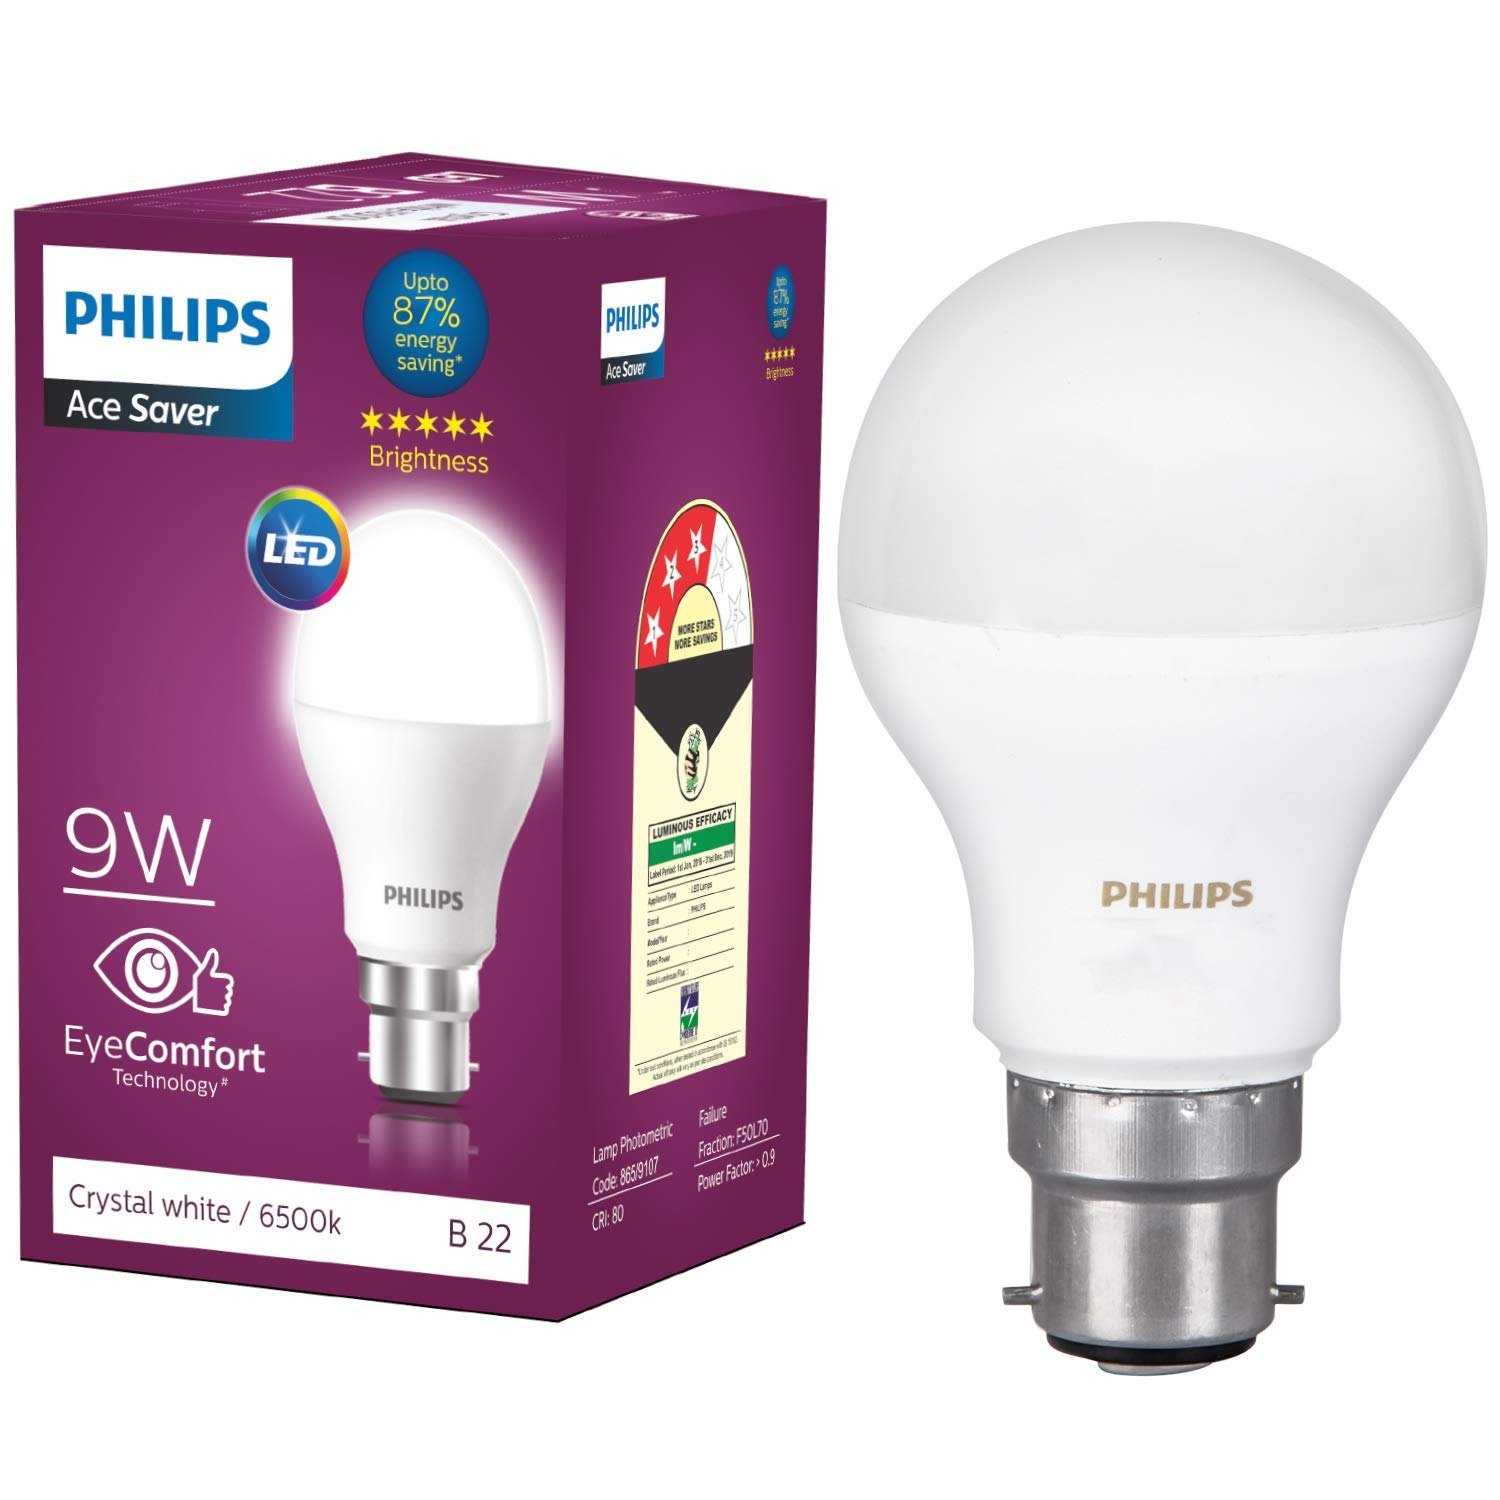 What Is A 9-Watt LED Bulb Equivalent To